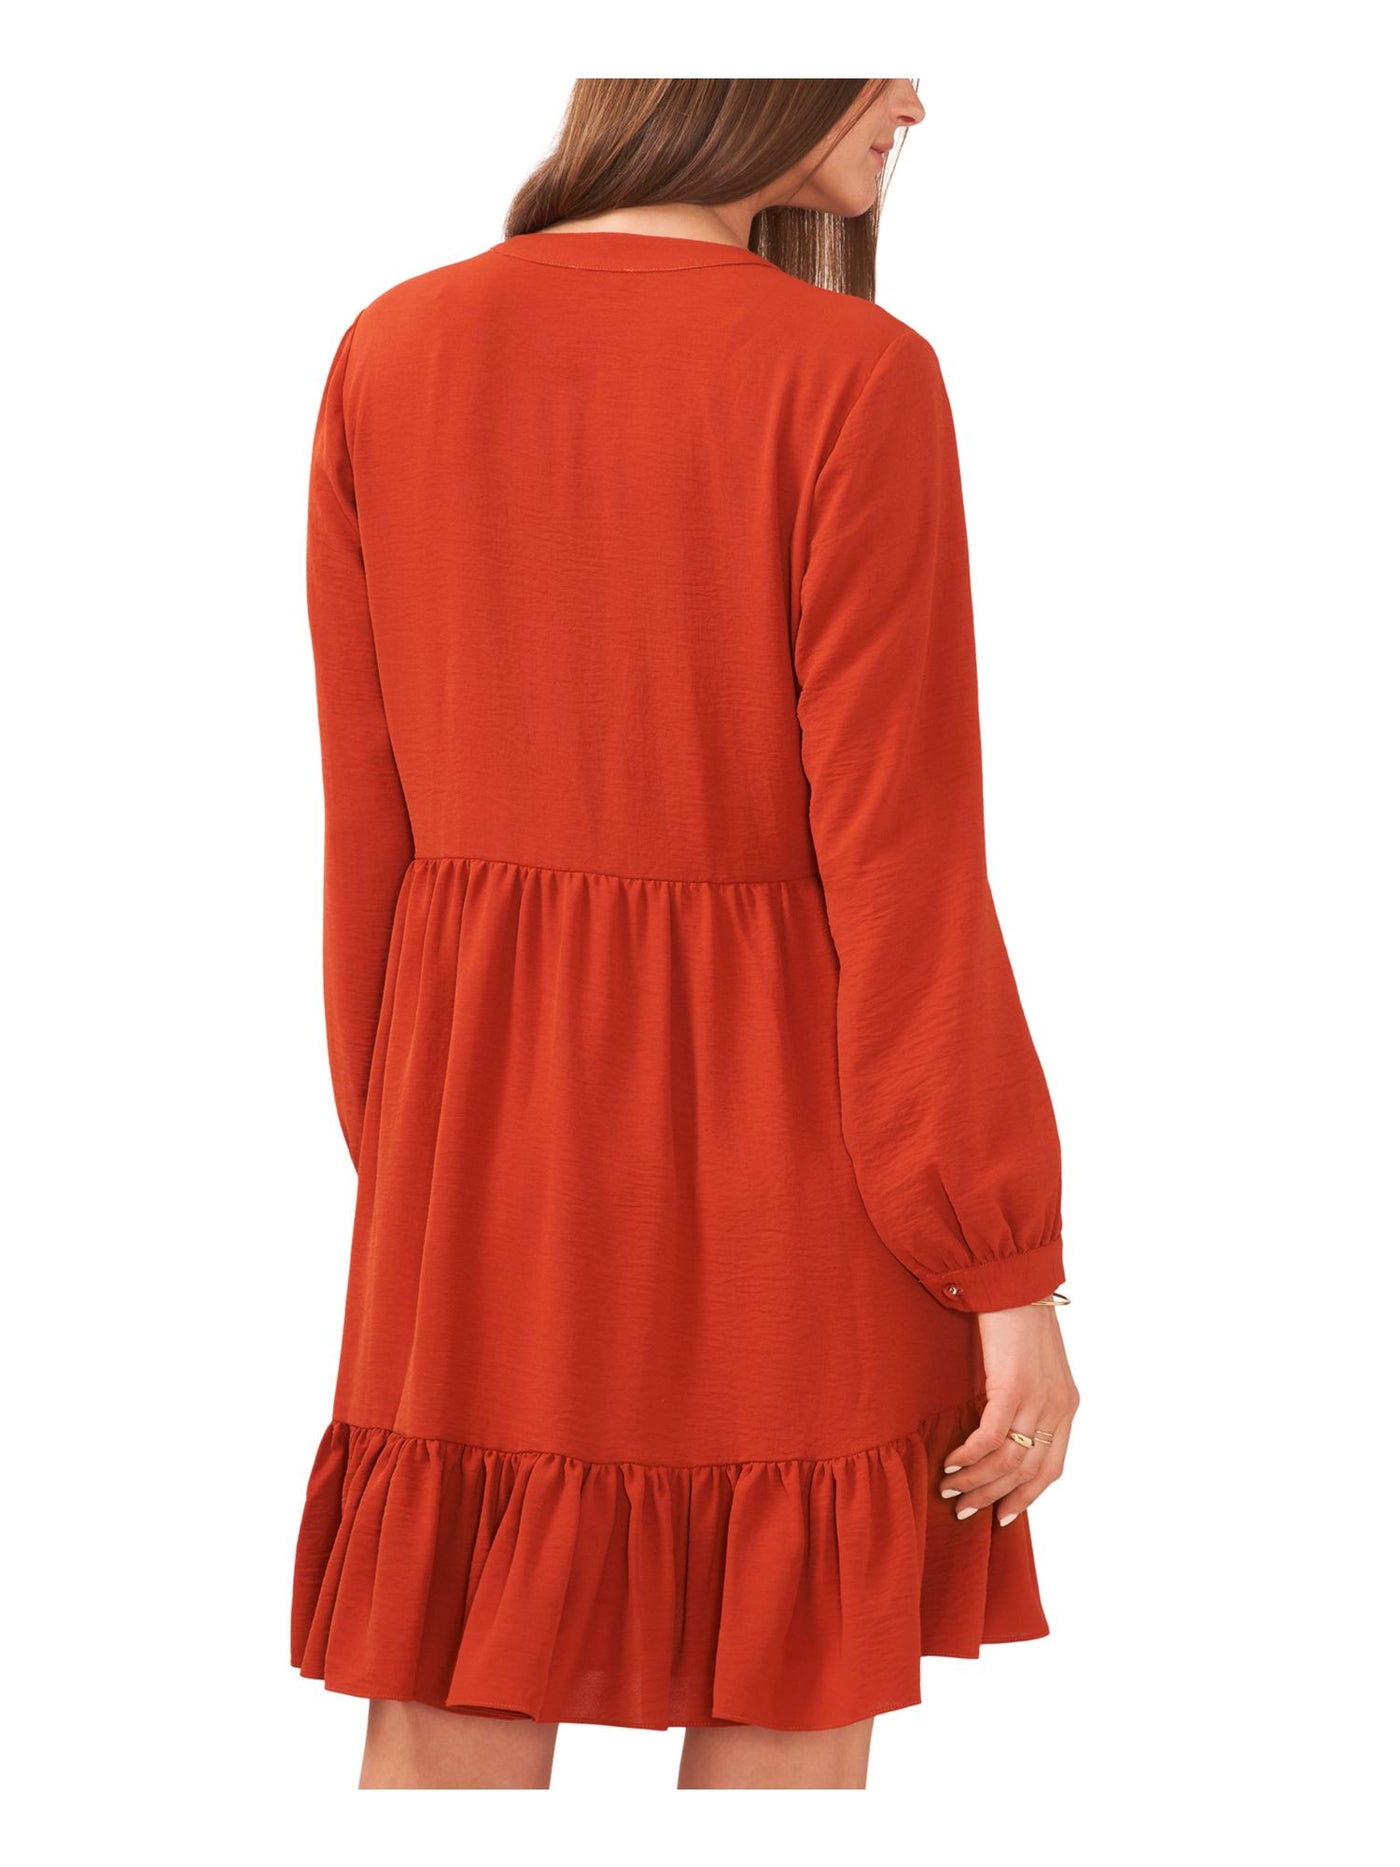 VINCE CAMUTO Womens Orange Ruffled Gathered Pullover Unlined Bodice Cuffed Sleeve Split Above The Knee Fit + Flare Dress XS